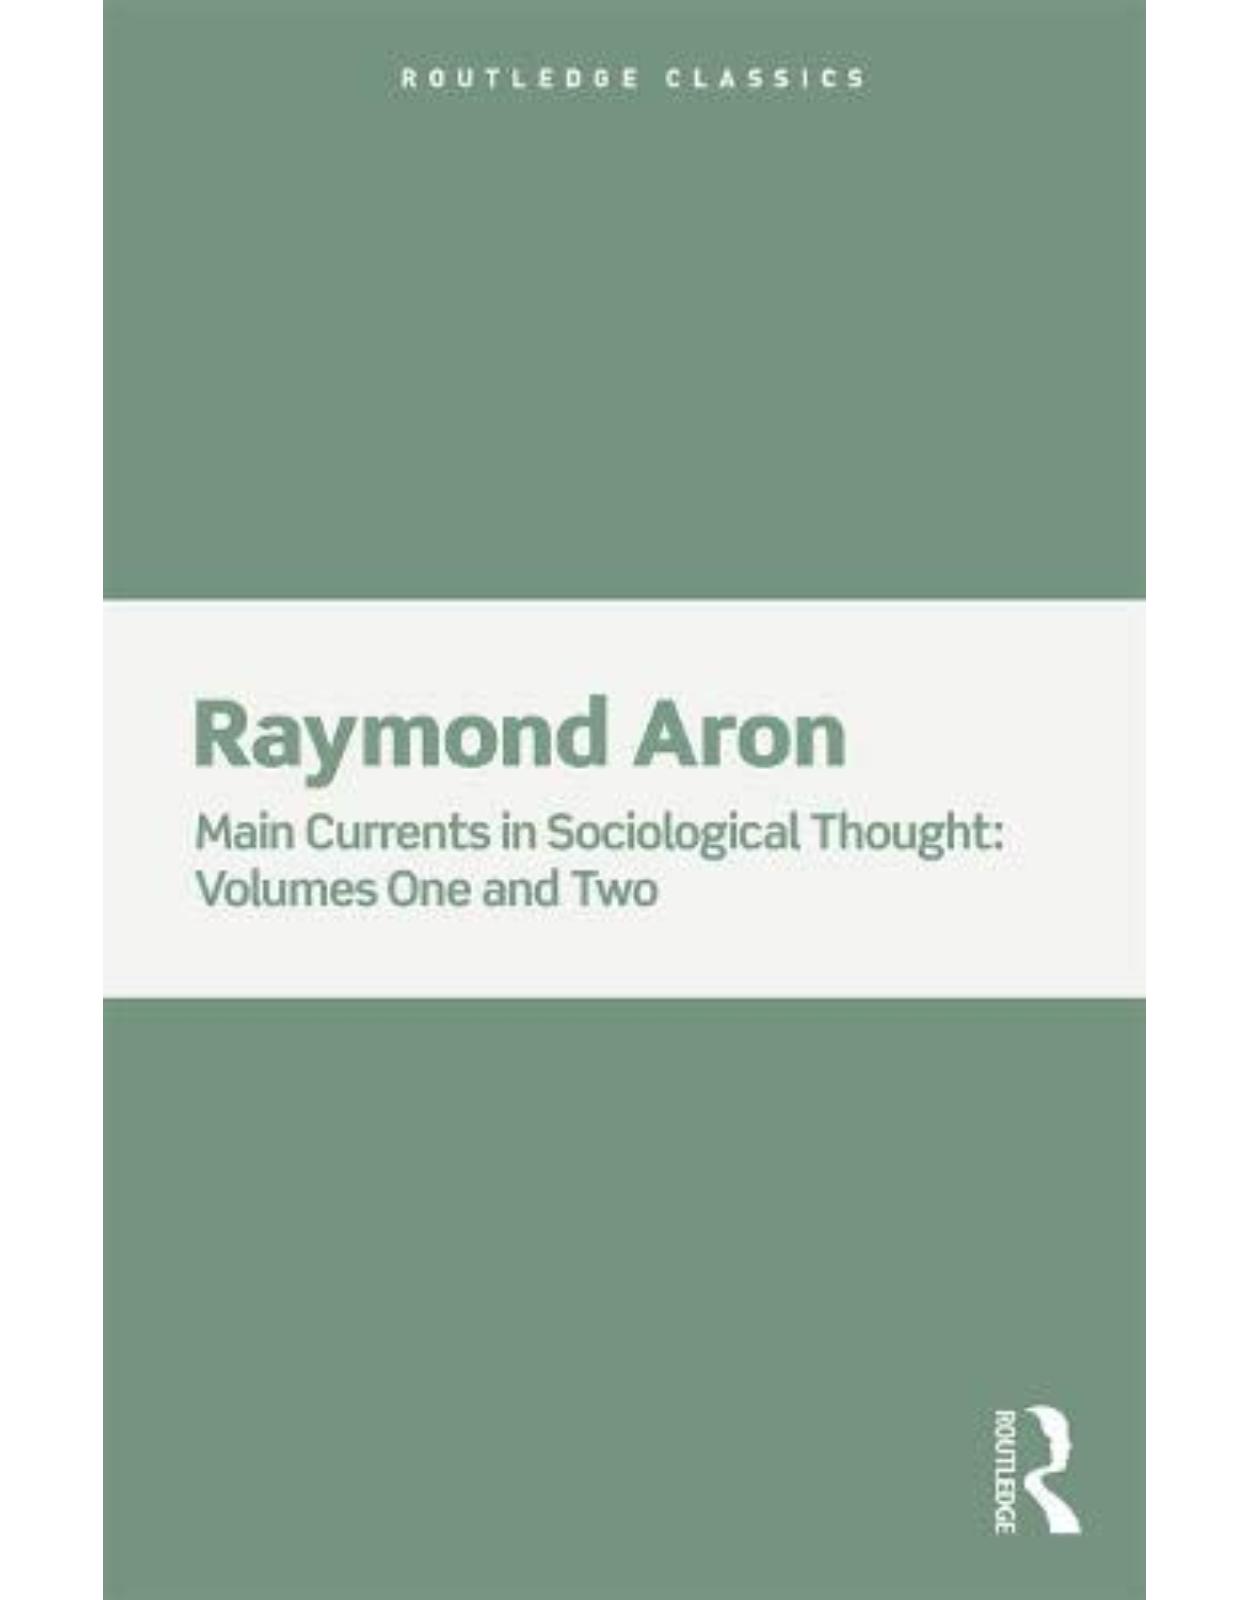 Main Currents in Sociological Thought: 2 Volume Set (Routledge Classics) 